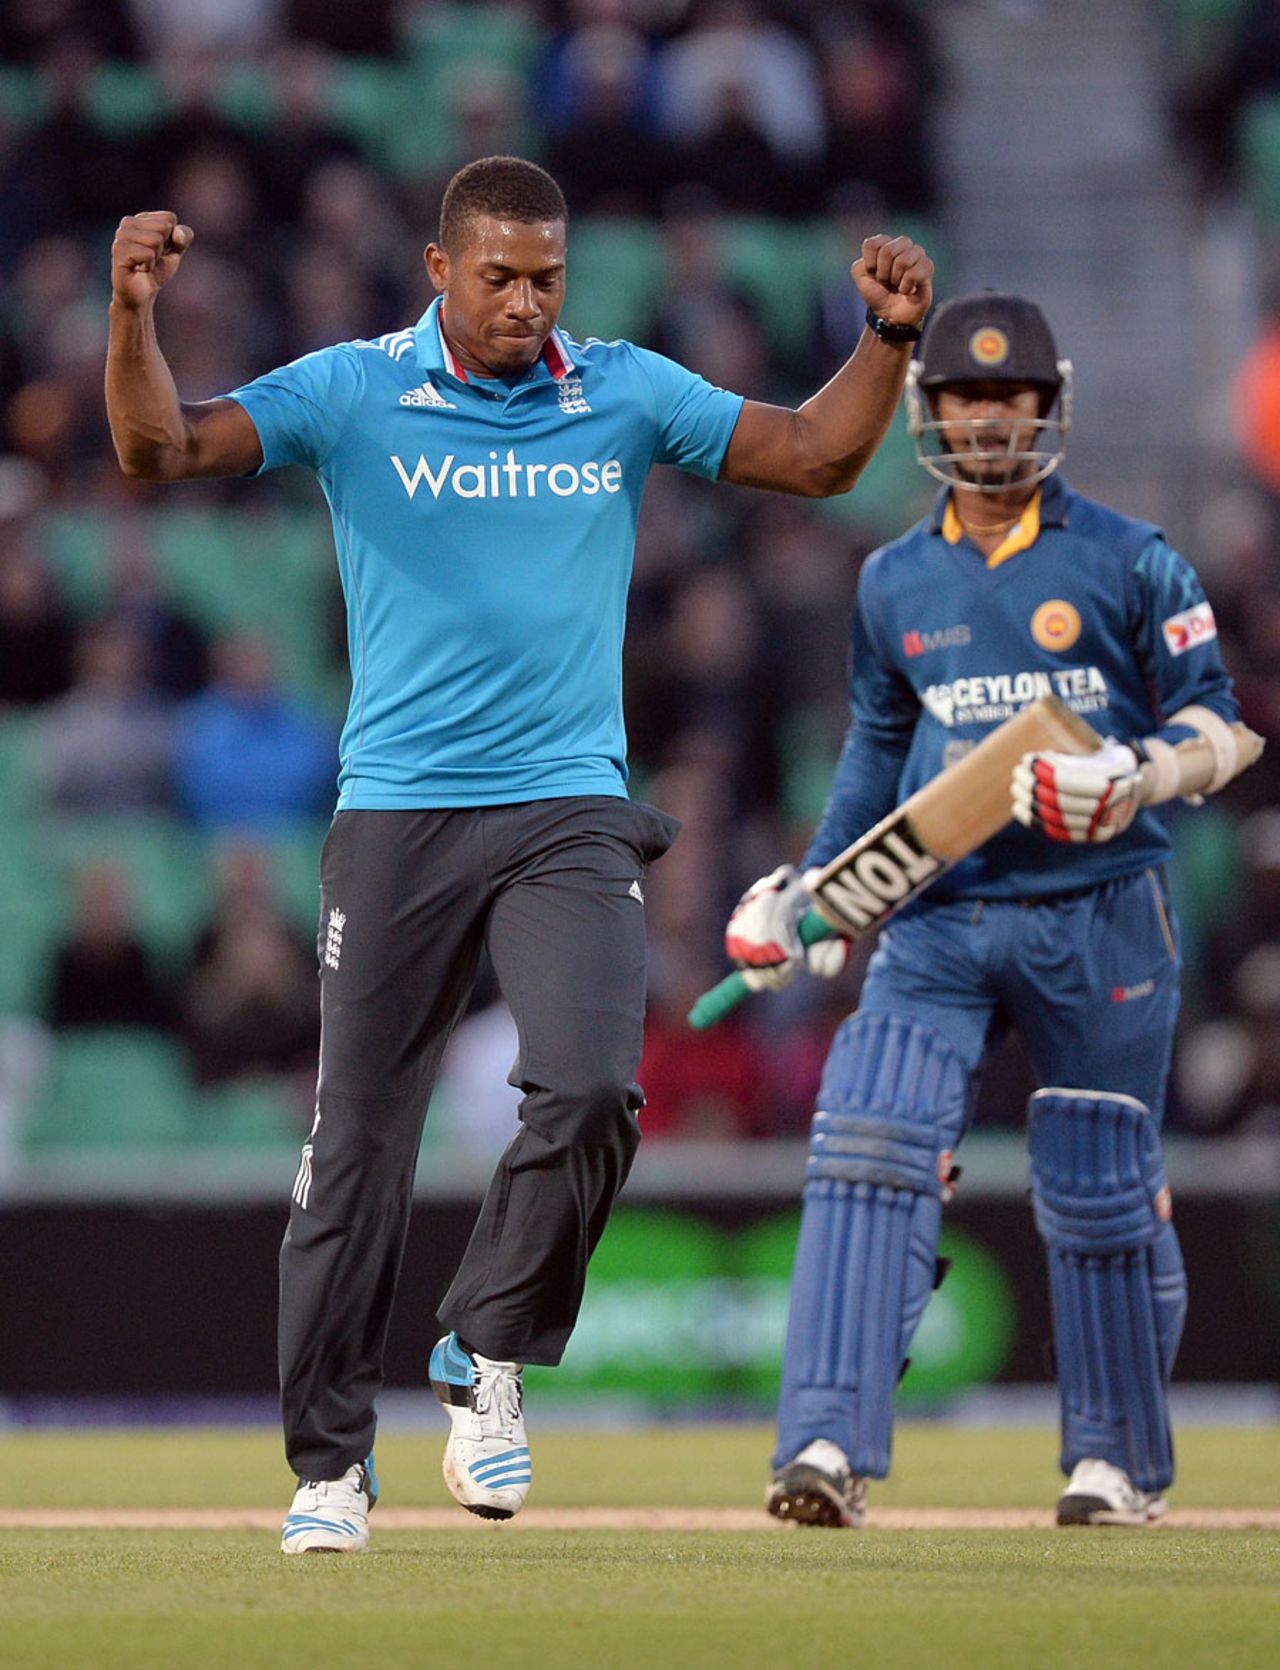 Chris Jordan followed his lively batting with excellent bowling, England v Sri Lanka, 1st ODI, The Oval, May 22, 2014